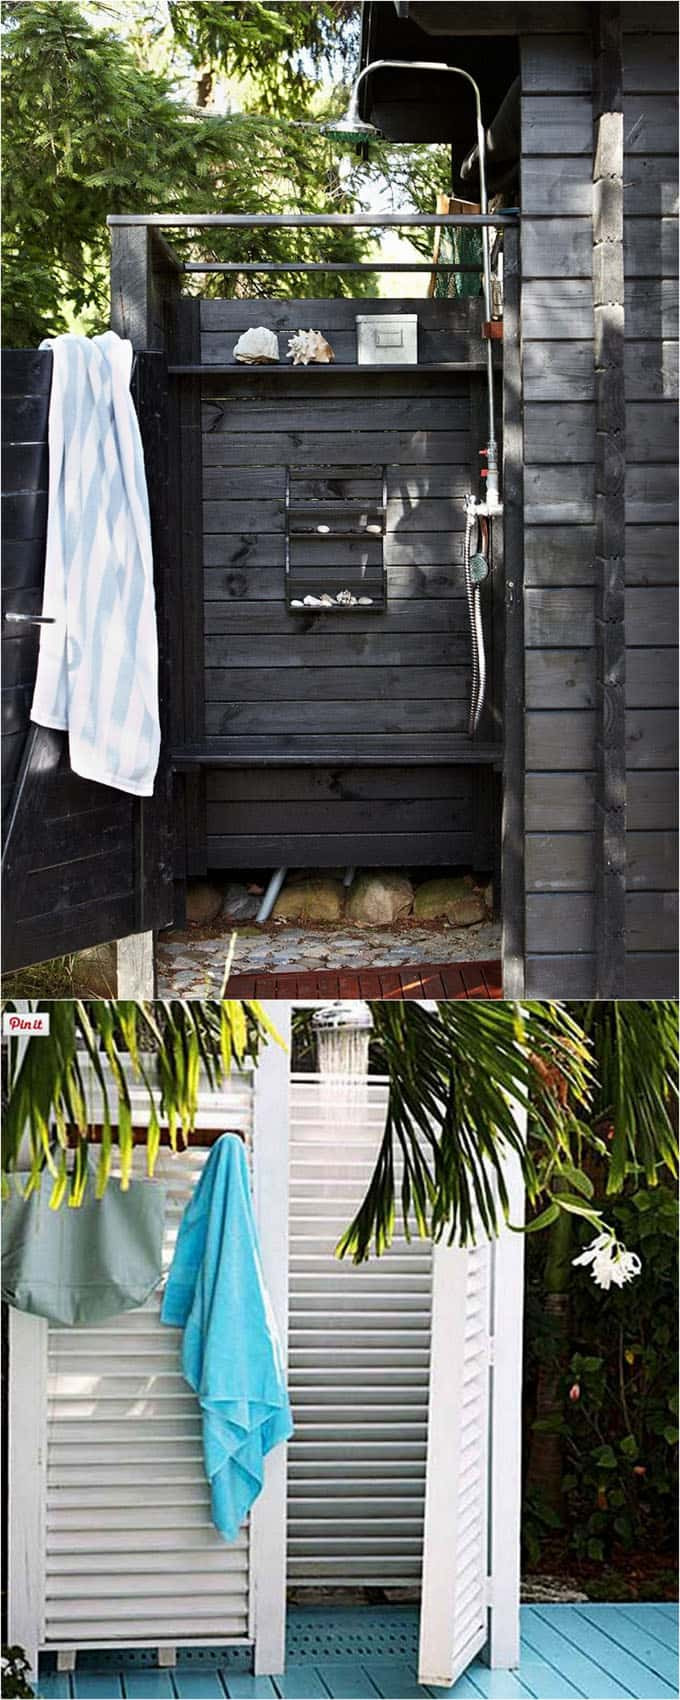 DIY Outdoor Shower Enclosure
 32 Beautiful DIY Outdoor Shower Ideas for the Best